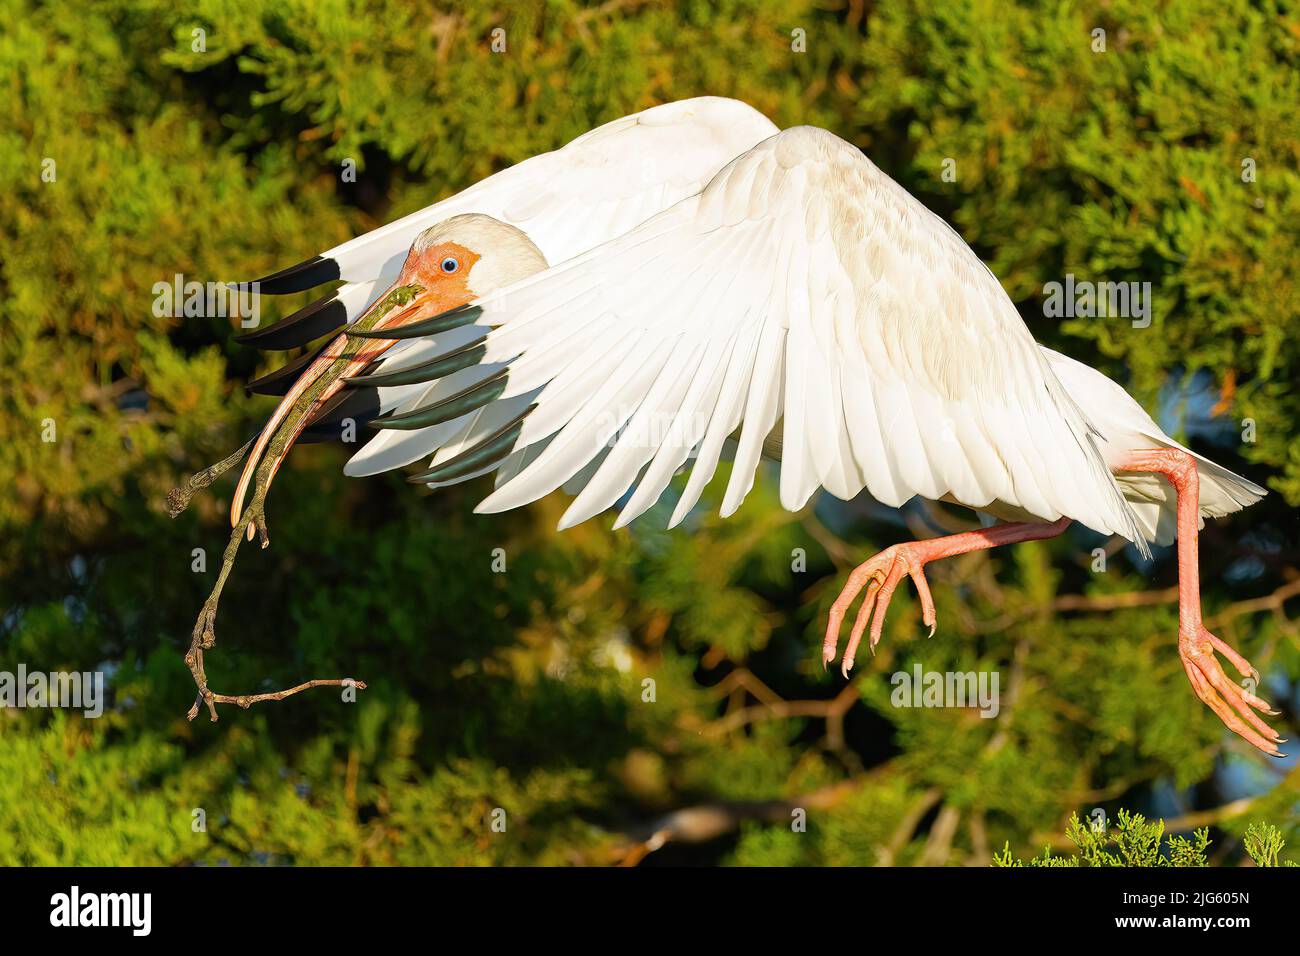 A White Ibis in Flight with Stick in Mouth Stock Photo